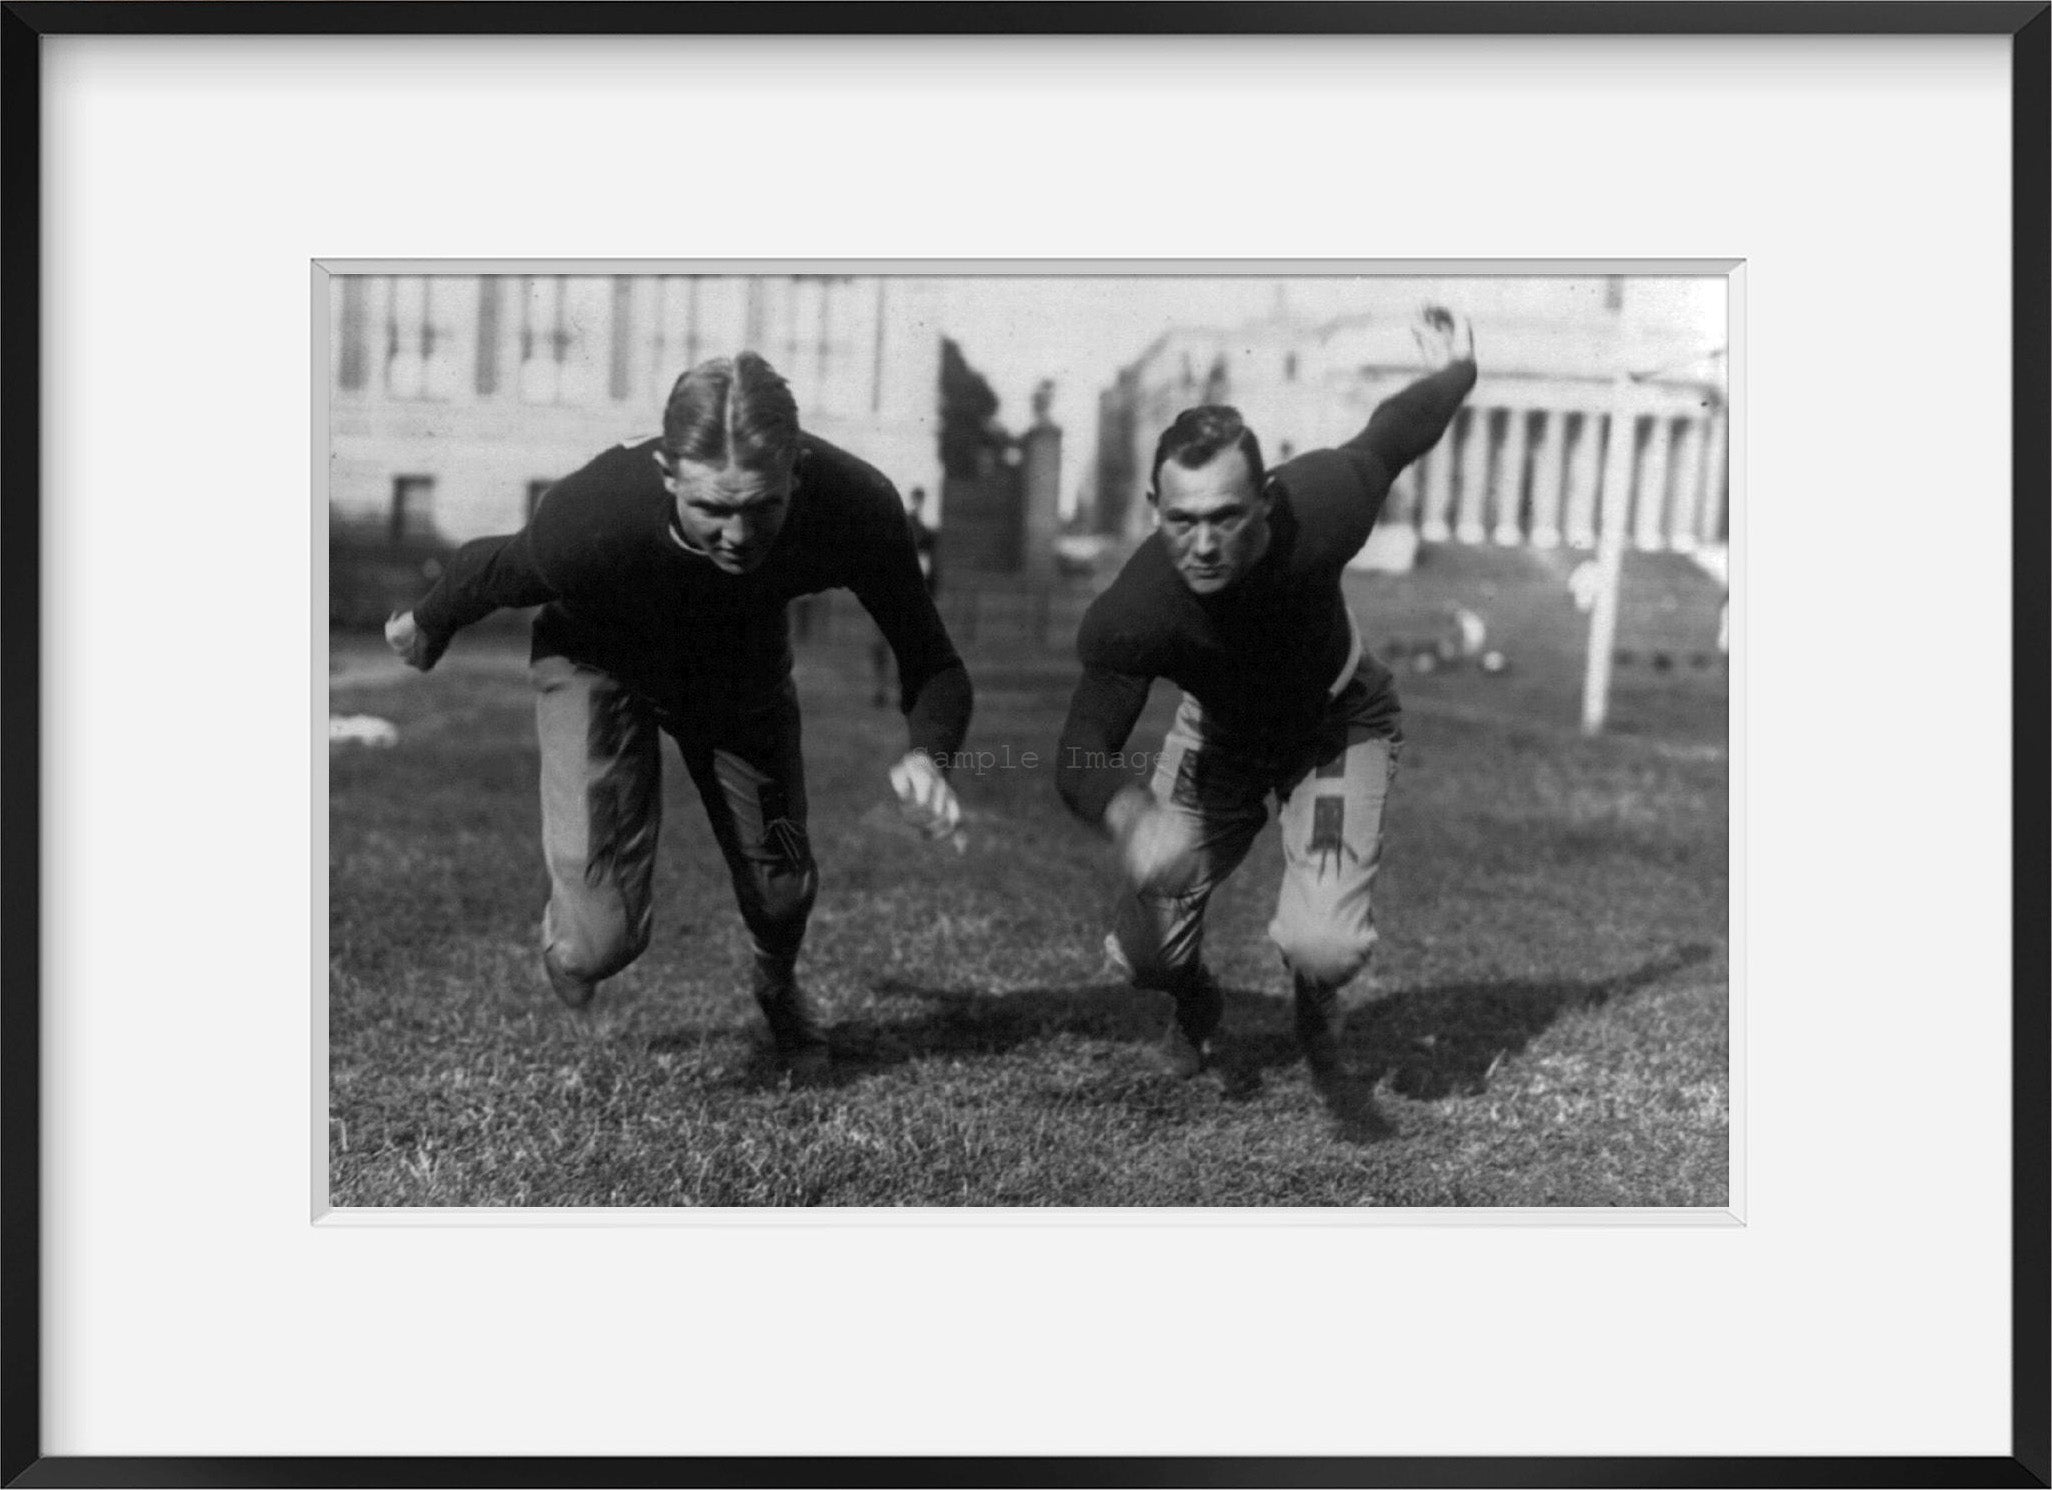 Photo: Healy, tackle, Brown, center, on Columbia Football Team, 2 men lunging forward